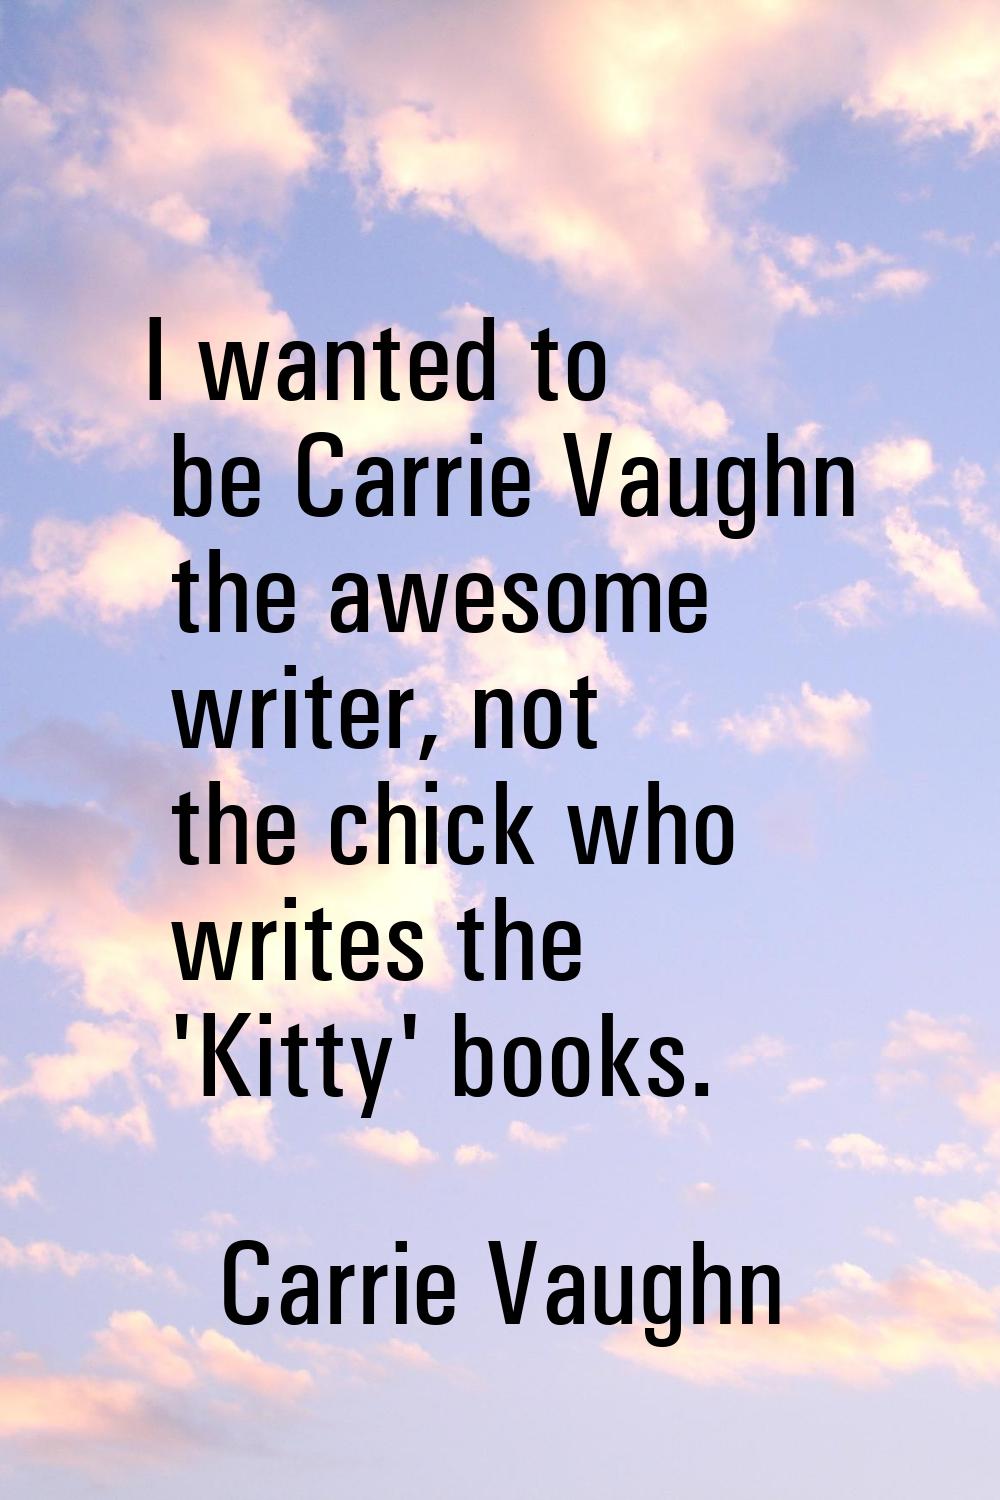 I wanted to be Carrie Vaughn the awesome writer, not the chick who writes the 'Kitty' books.